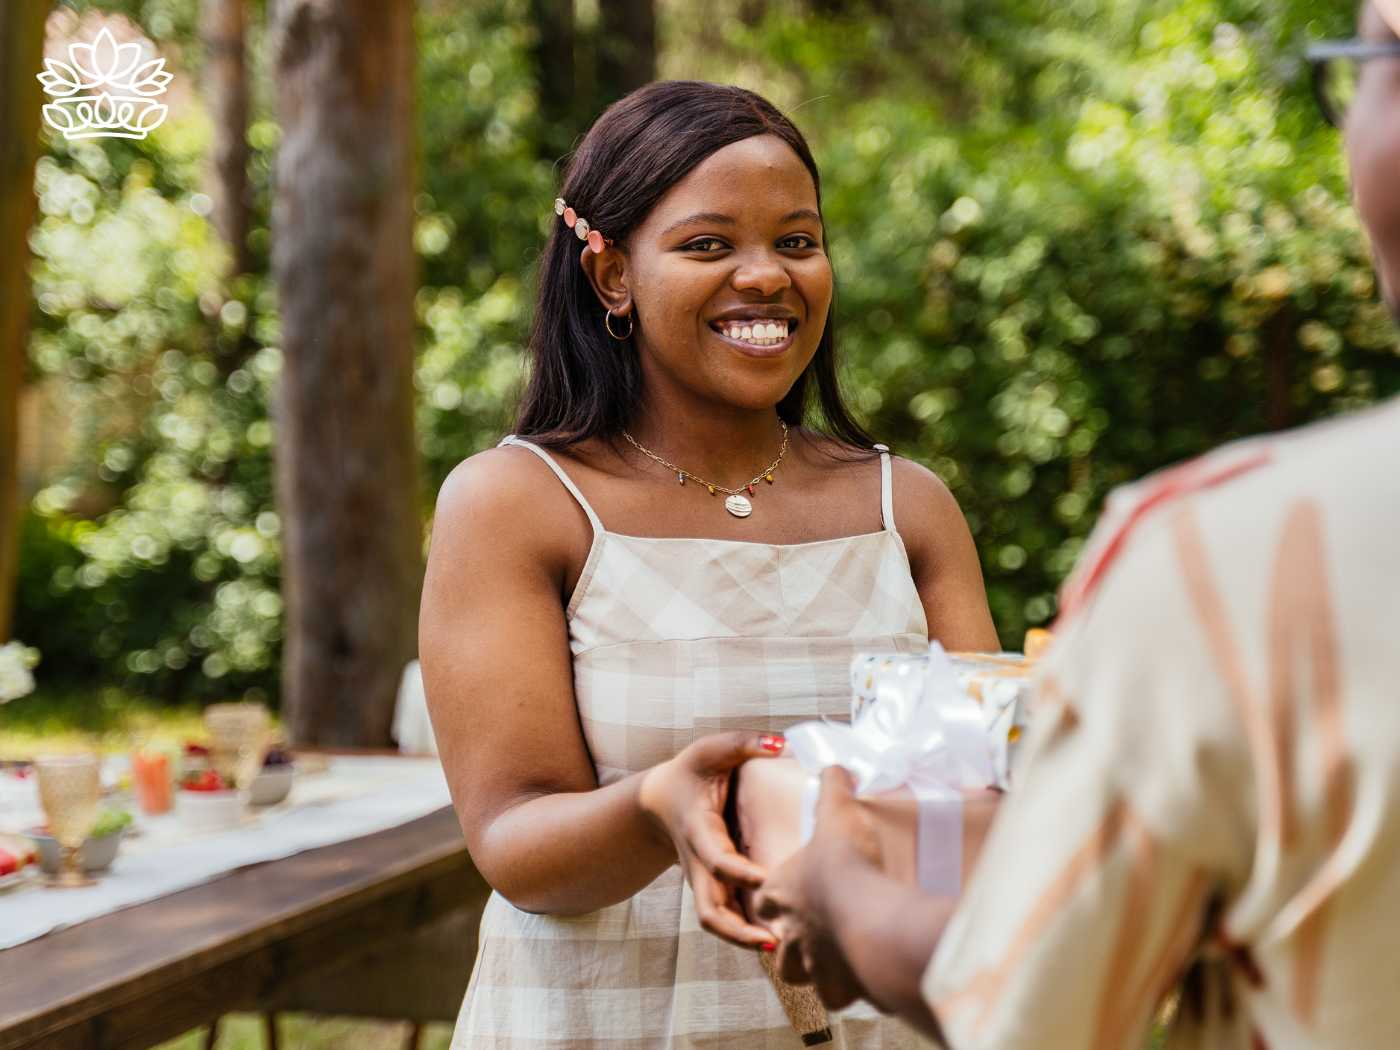 A smiling woman receiving a wrapped gift outdoors, from the Gifts Under R500 Collection at Fabulous Flowers and Gifts, including keywords such as order, colours, favourite, delivery, and birthday